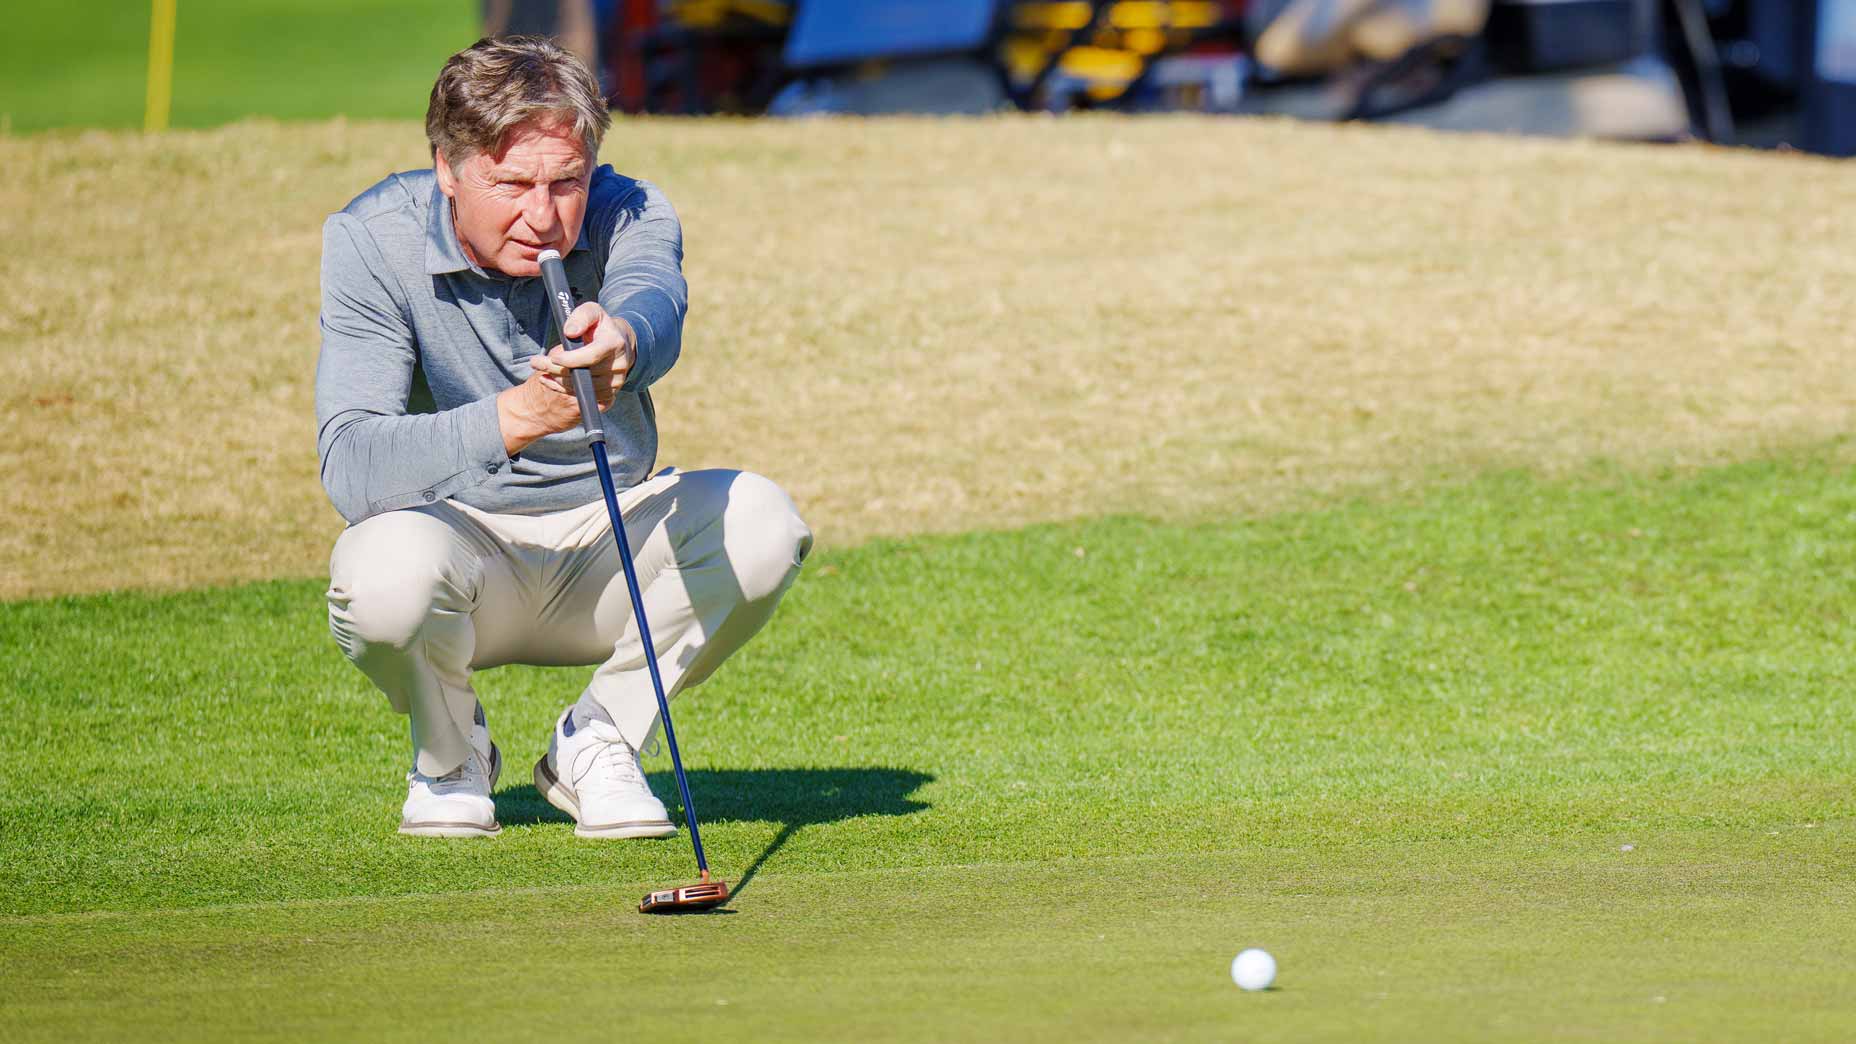 Brandel Chamblee crouches to read a putt on green at 2022 PGA Tour Champions Qualifying event